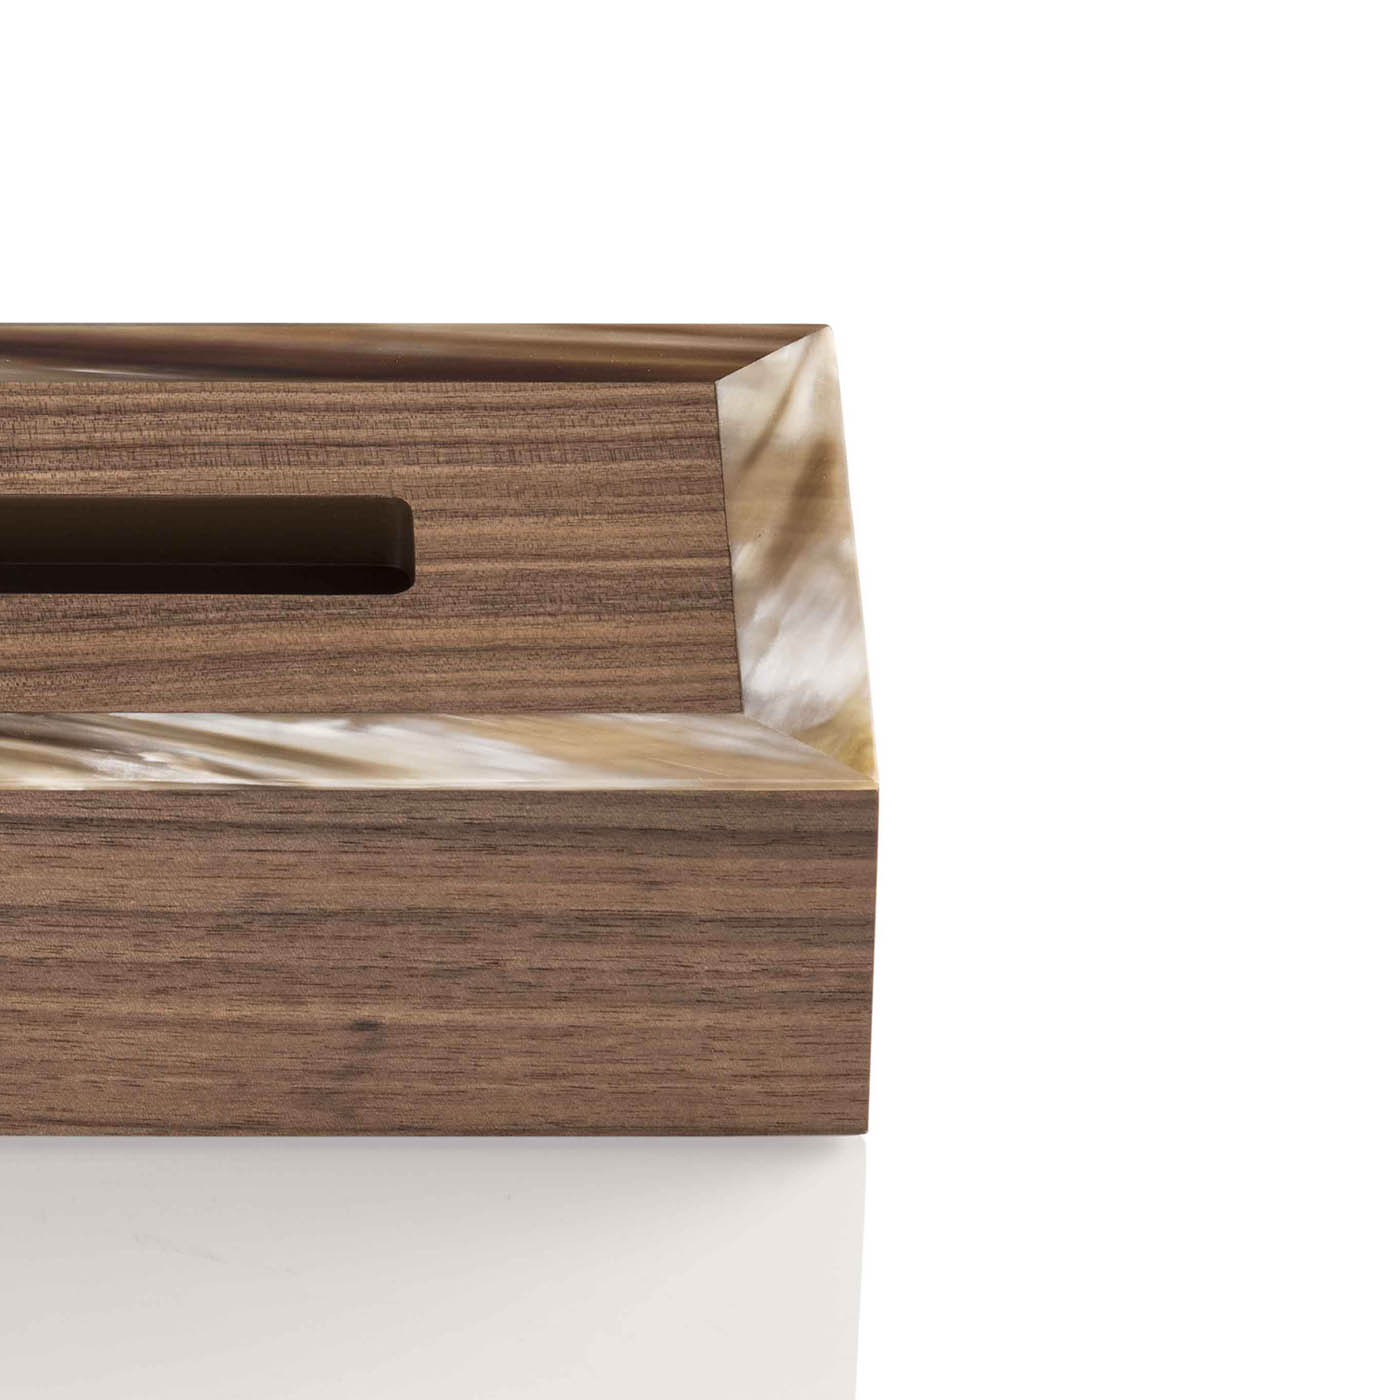 Office sets and smoking accessories - Geremia tissue box holder in horn and Canaletto walnut veneer - detail- Arcahorn